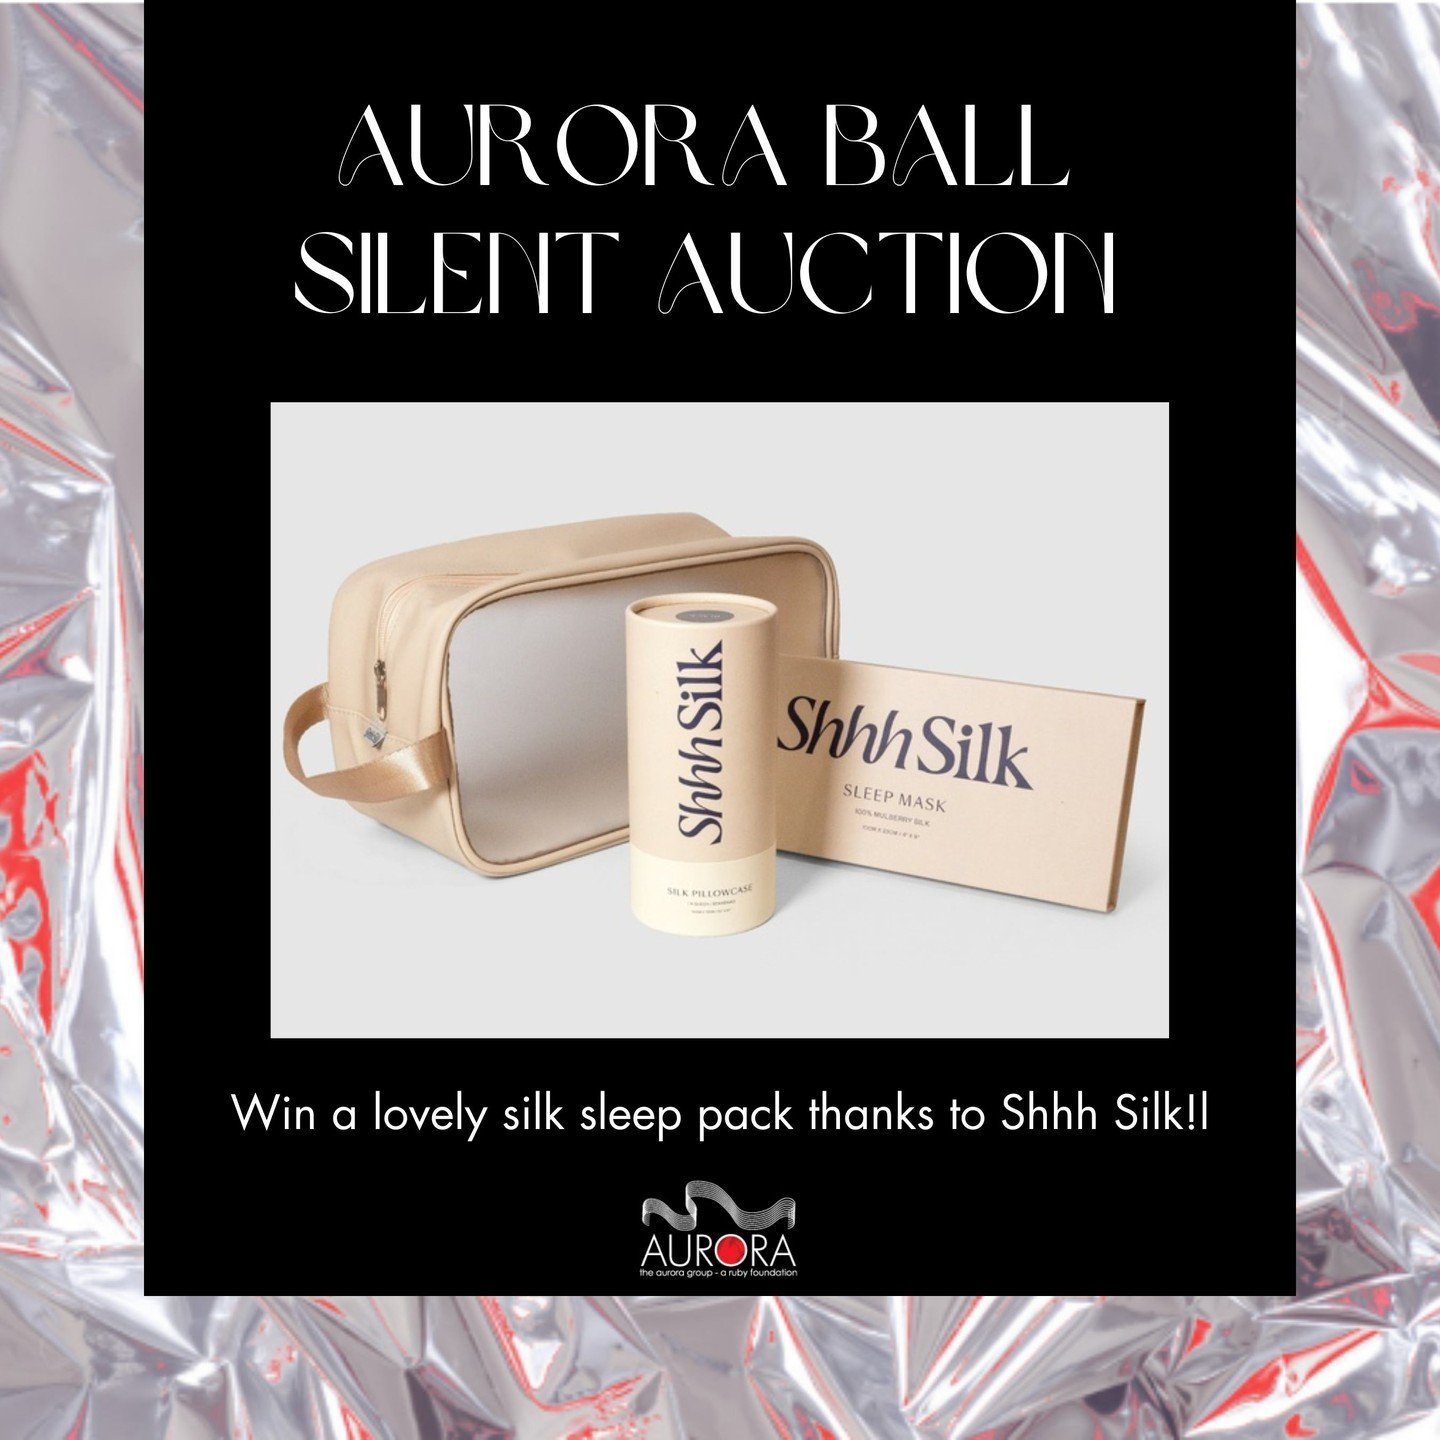 The fabulous team at Shhh Silk have donated this luscious silk Sleep Essentials Set to the Aurora Mirror Ball Silent Auction, which includes a silk pillowcase, silk eye mask and a cute cosmetics bag. 

The silent auction will go live online 2 weeks p